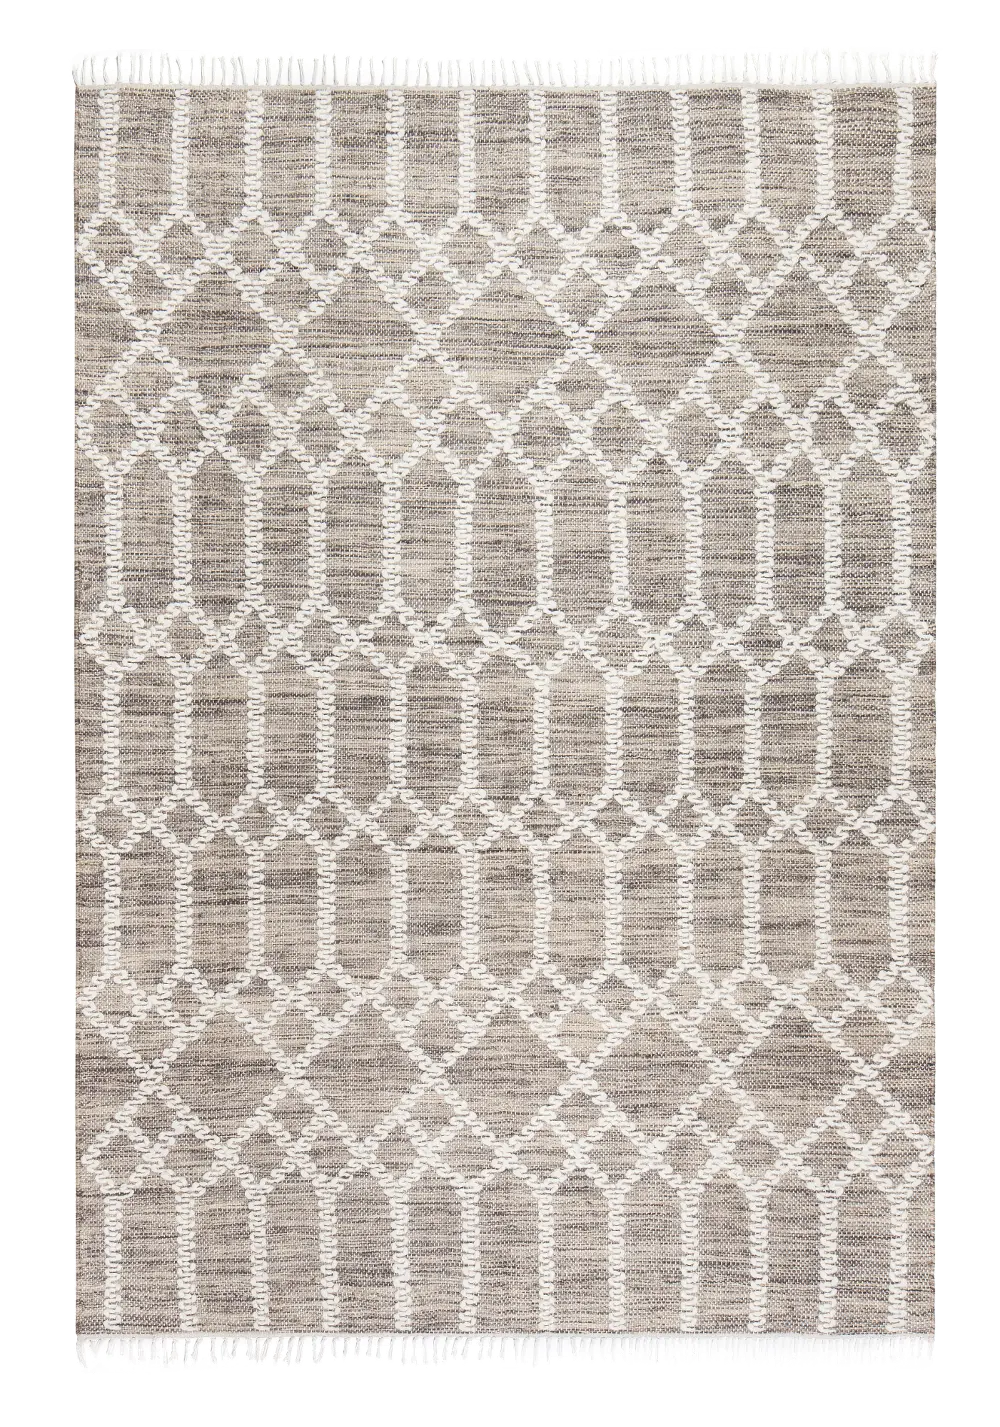 8 x 10 Large Beige and Ivory Area Rug - Naturals-1